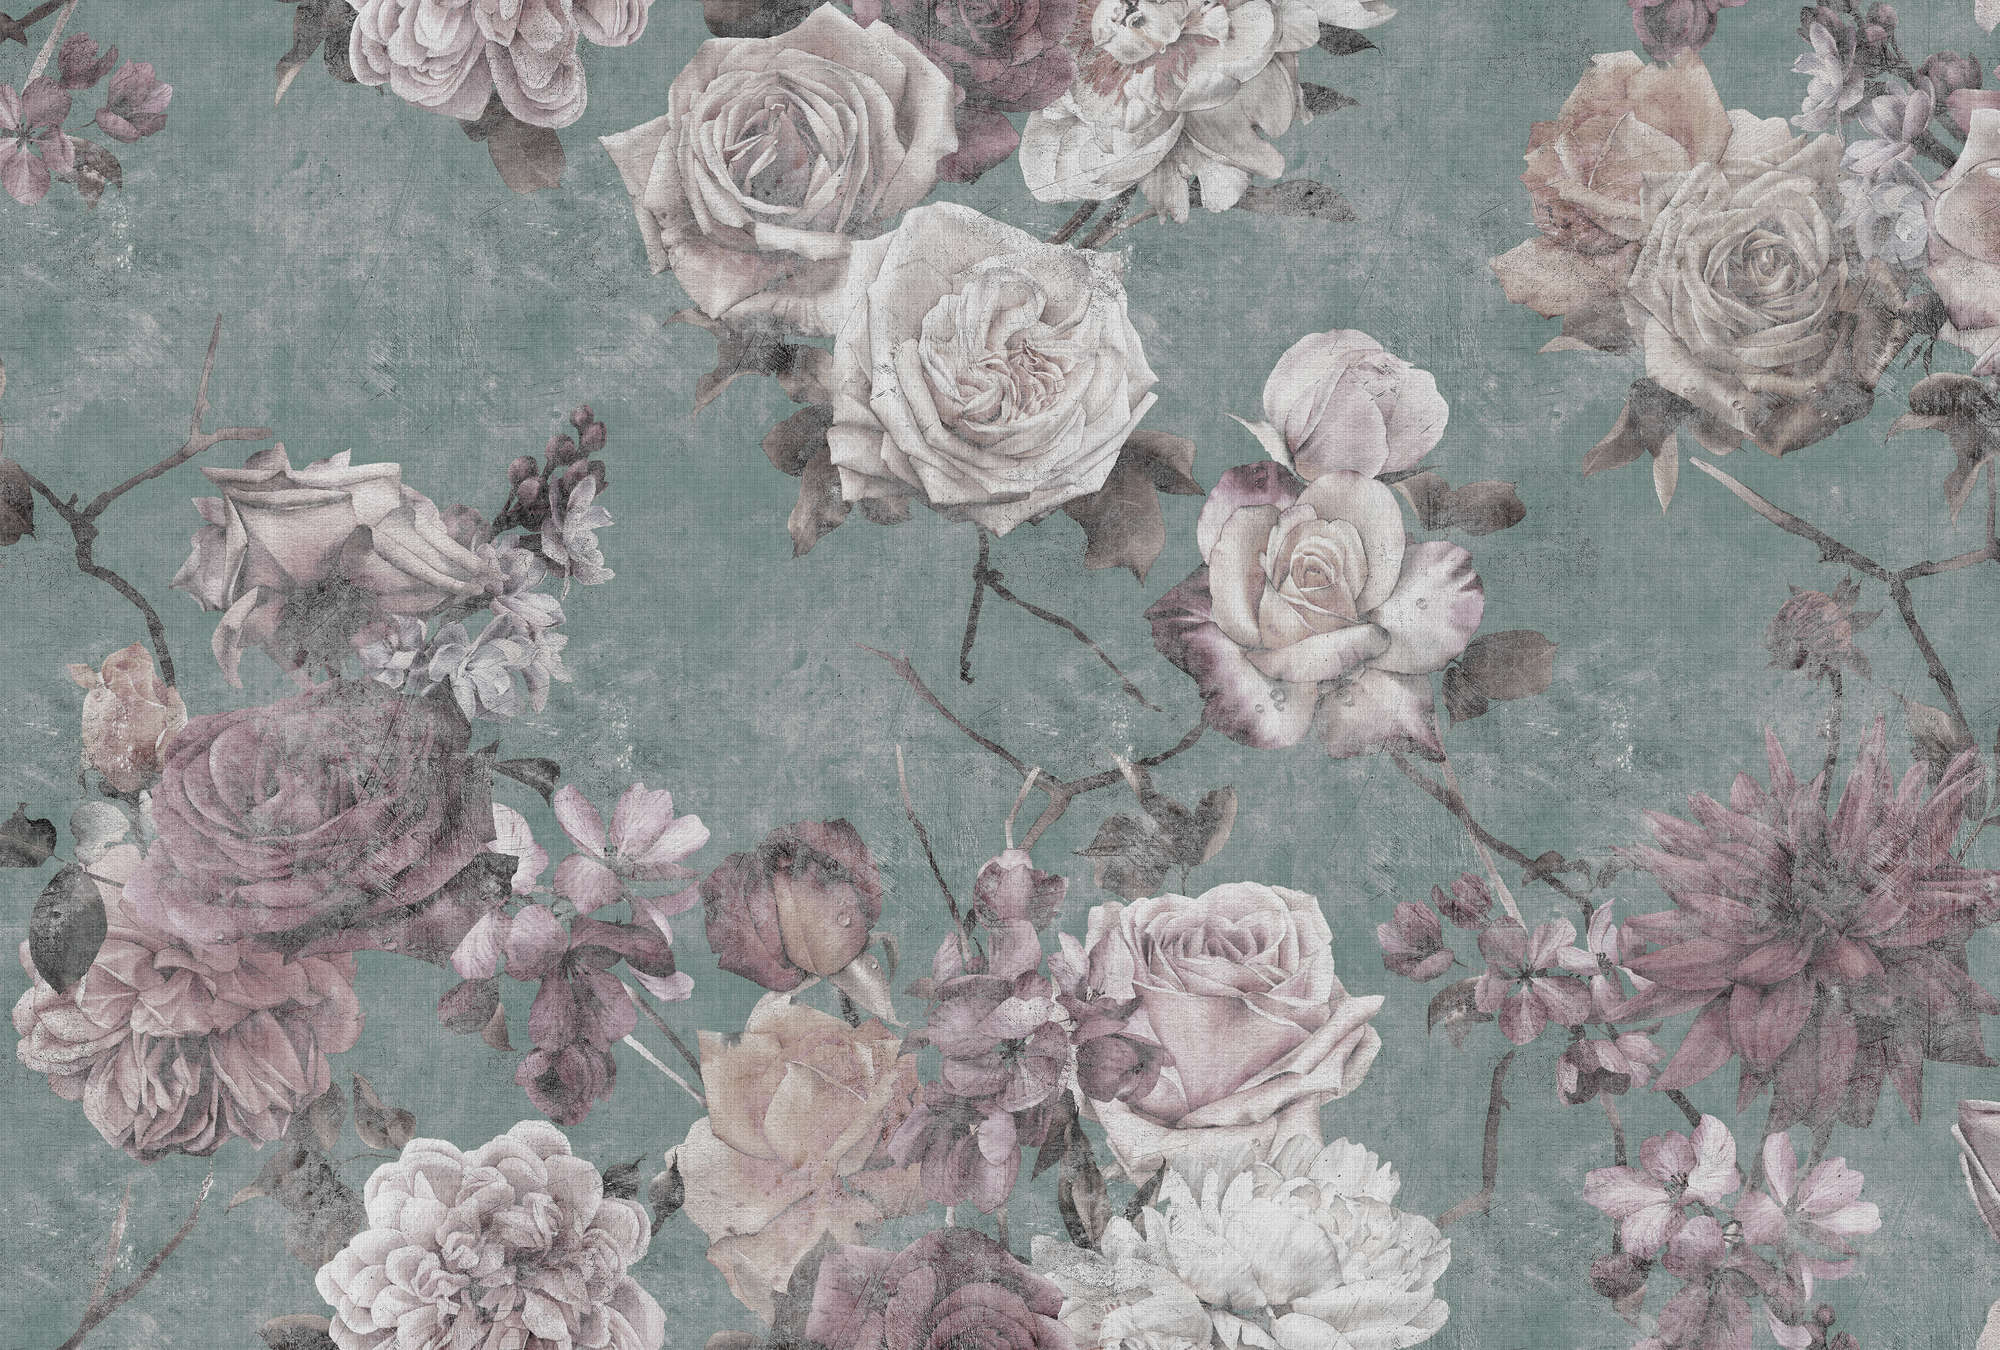             Sleeping Beauty 2 - Vintage Style Rose Blossoms Wallpaper - Nature Linen Texture - Pink, Turquoise | Premium Smooth Non-woven
        